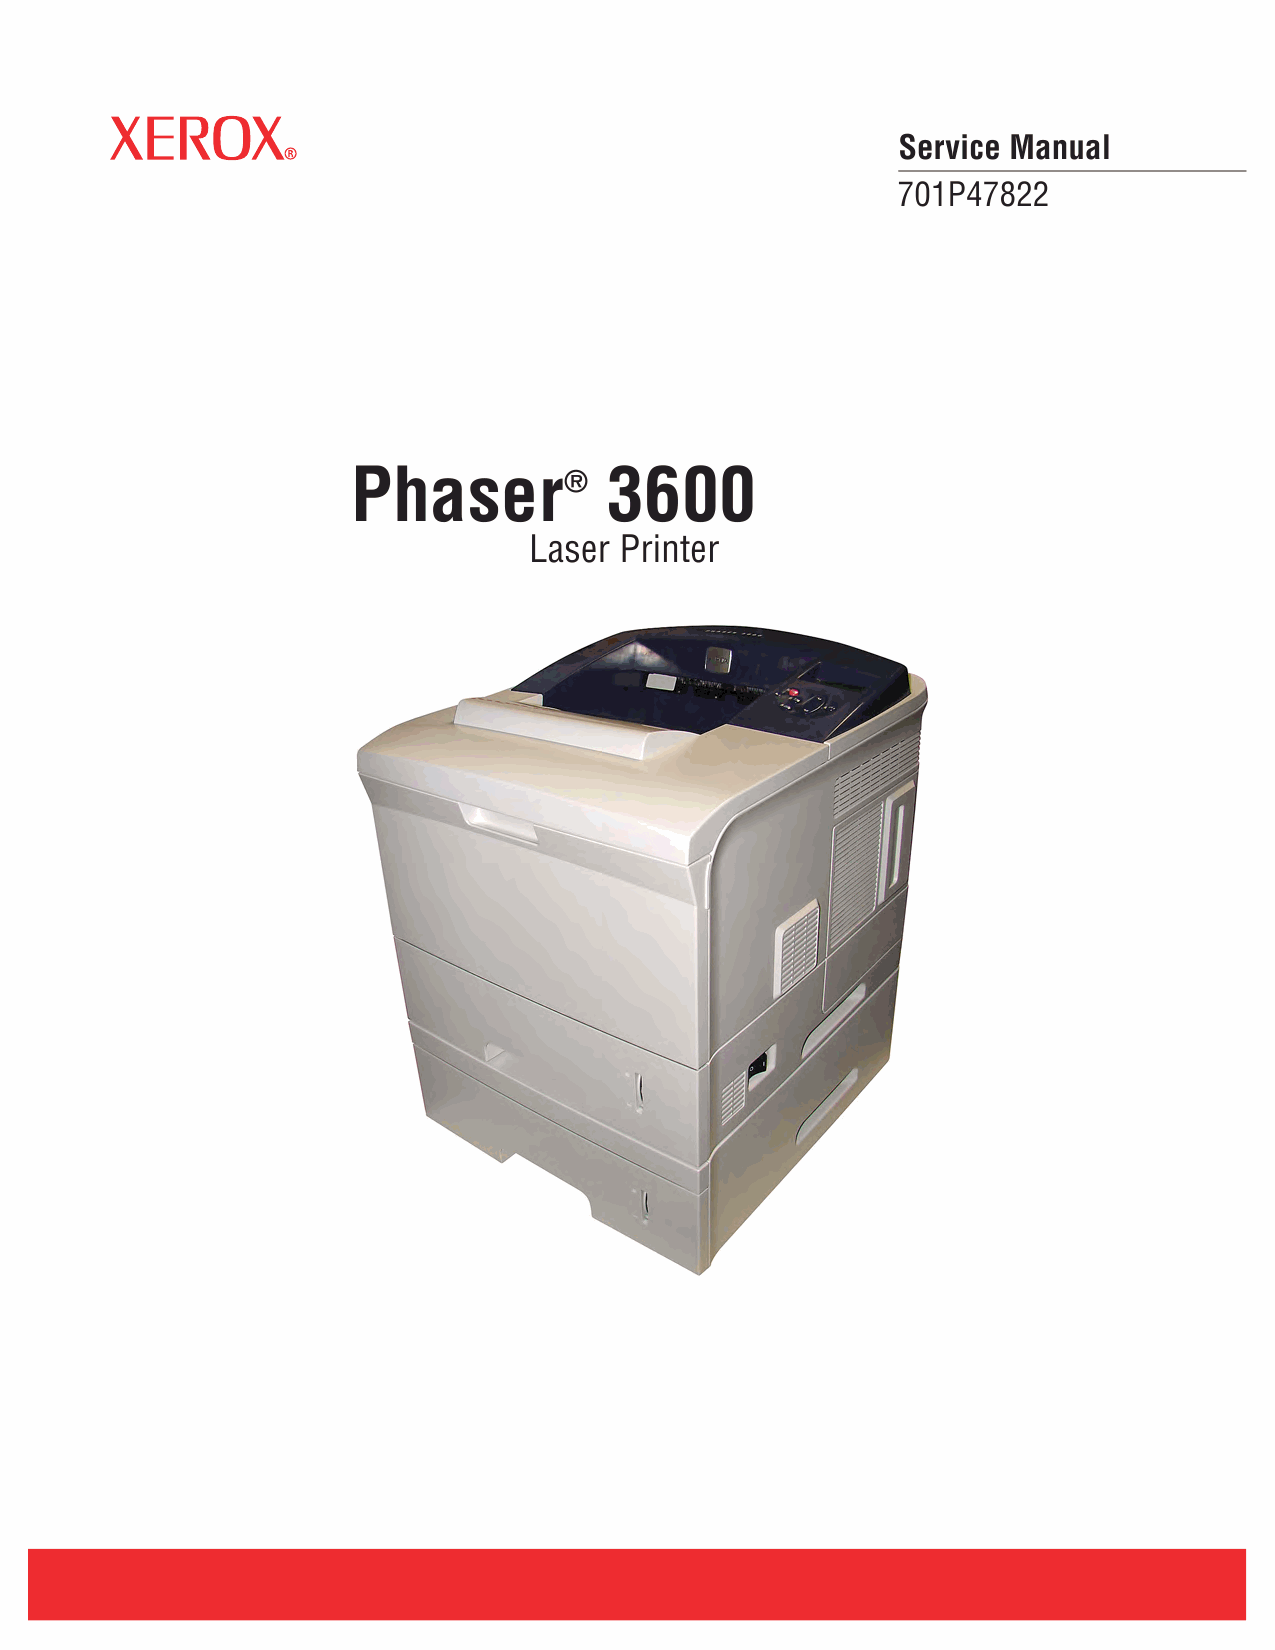 Xerox Phaser 3600 Parts List and Service Manual-1